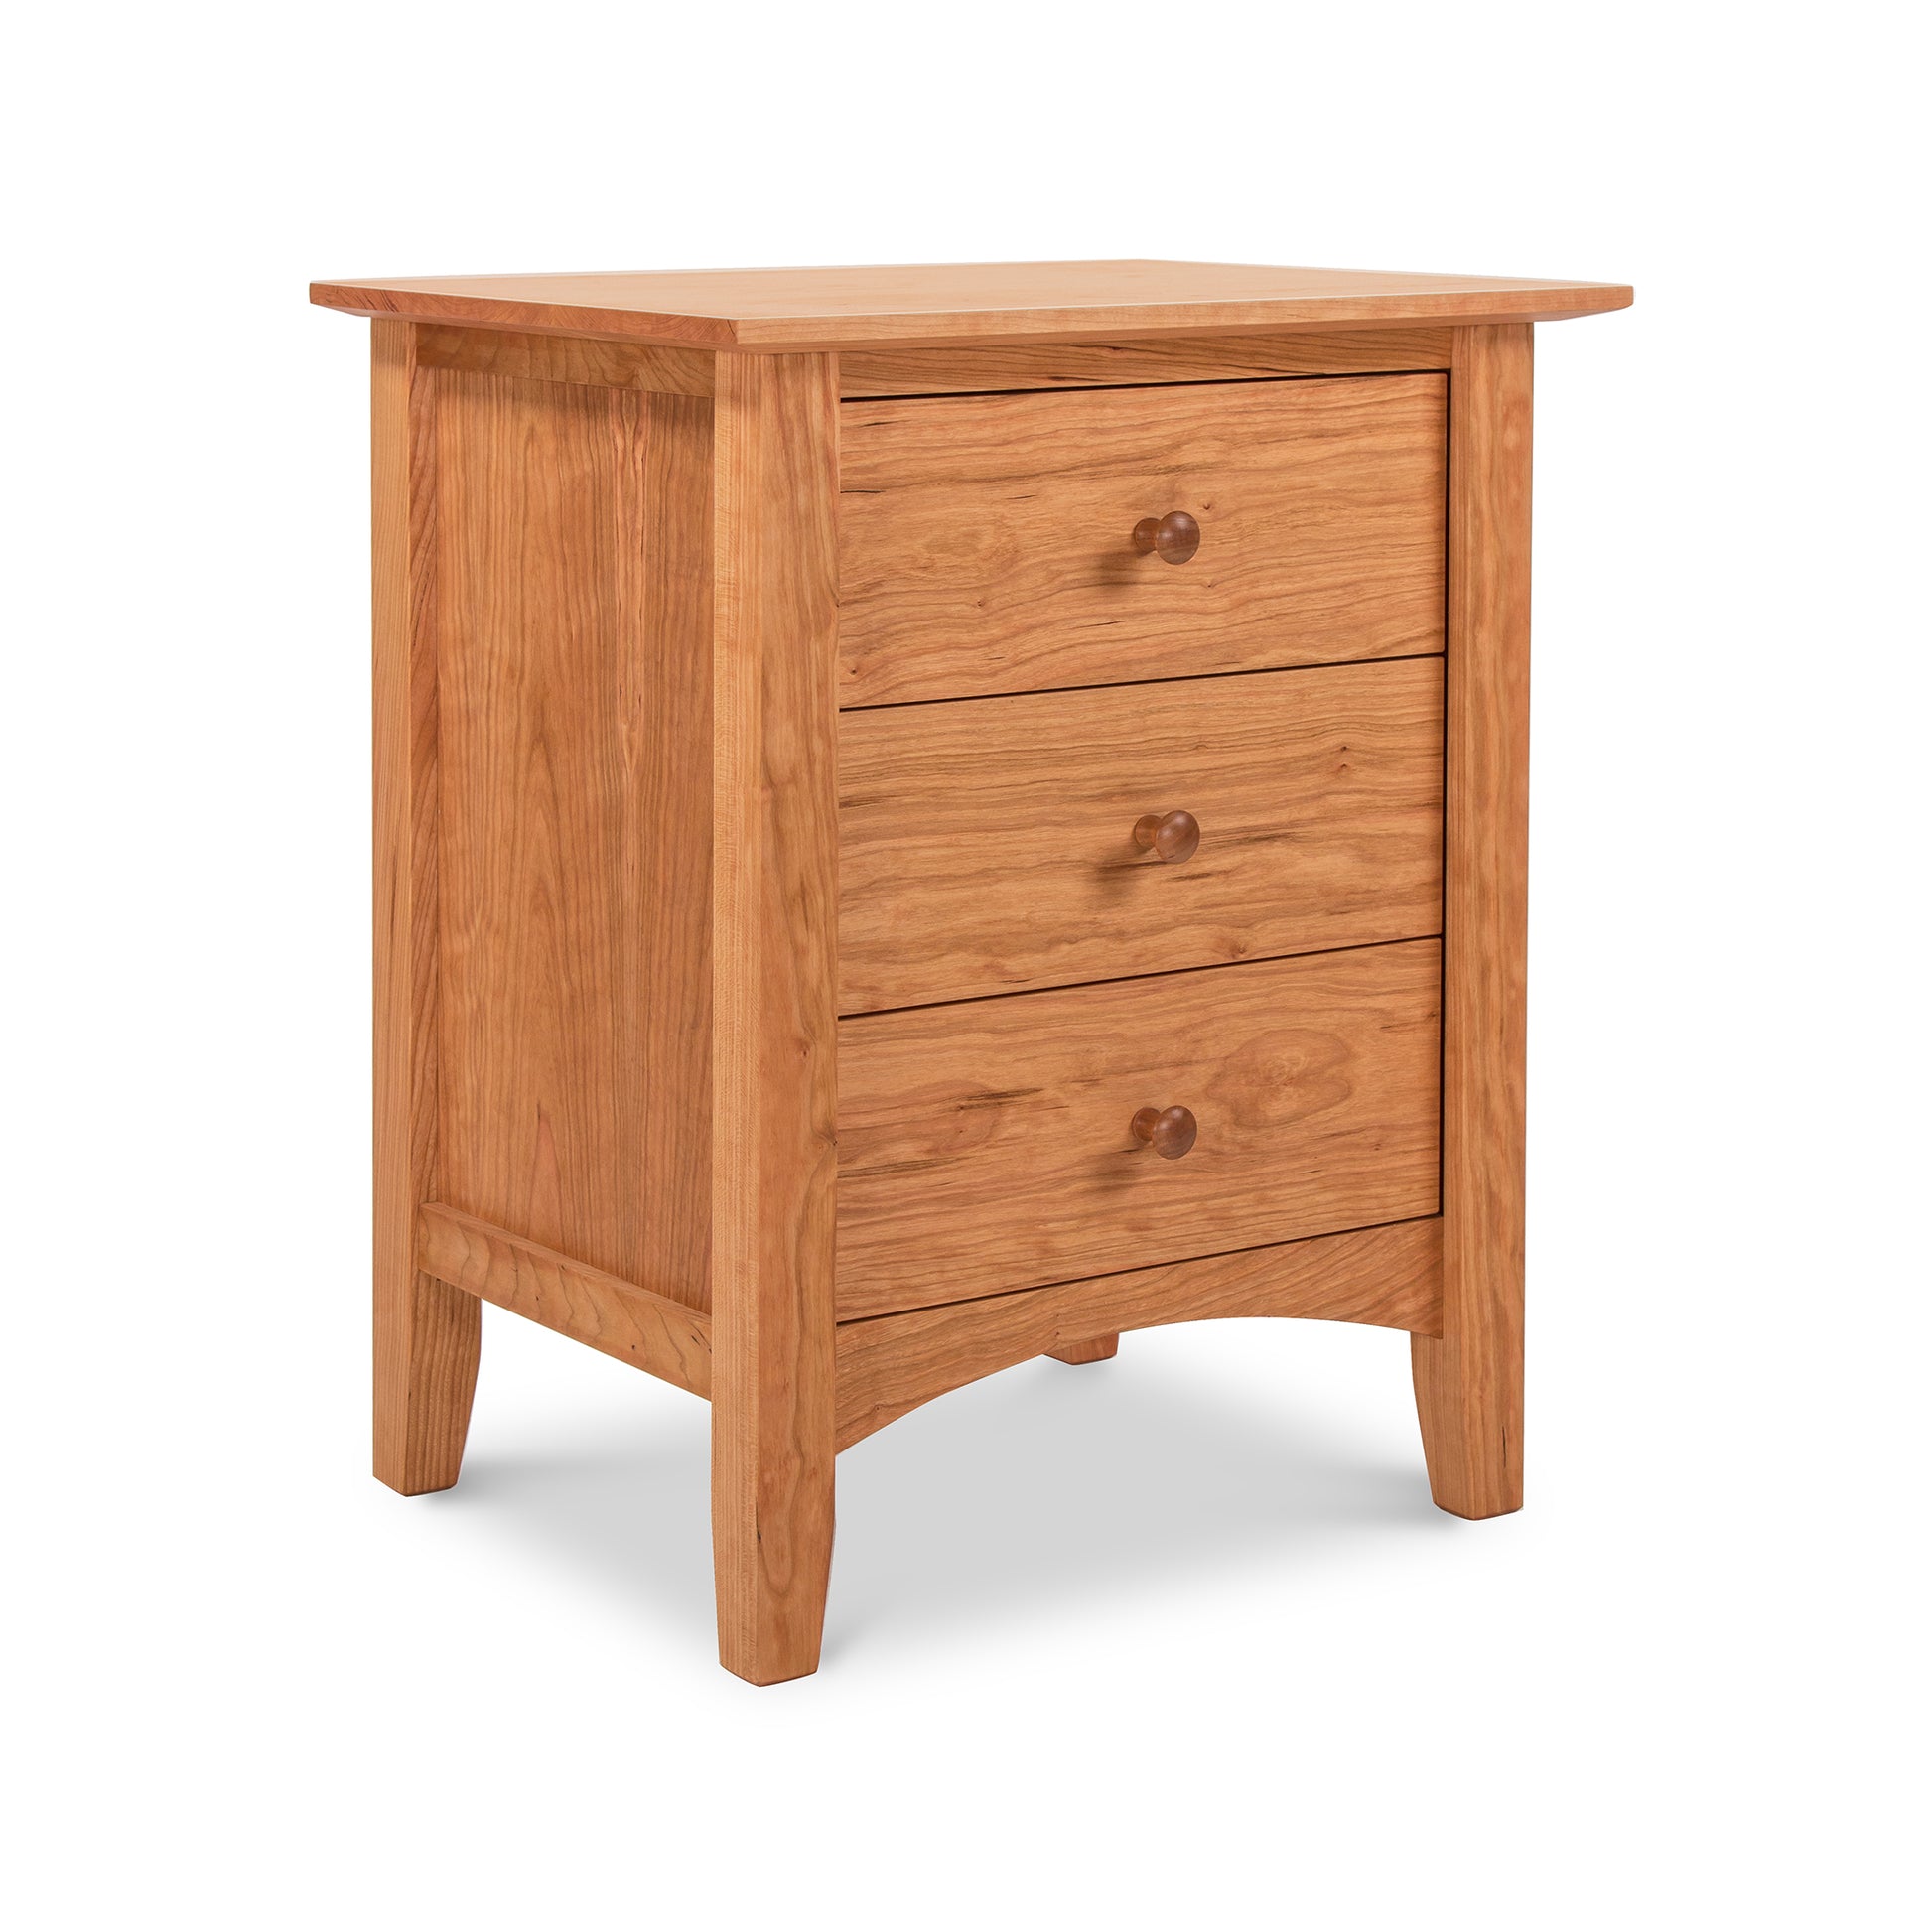 A Maple Corner Woodworks American Shaker 3-Drawer Nightstand with three drawers, each featuring a round knob. The nightstand stands on slightly tapered legs and has a light brown finish, and is crafted using eco-friendly materials. It is positioned against